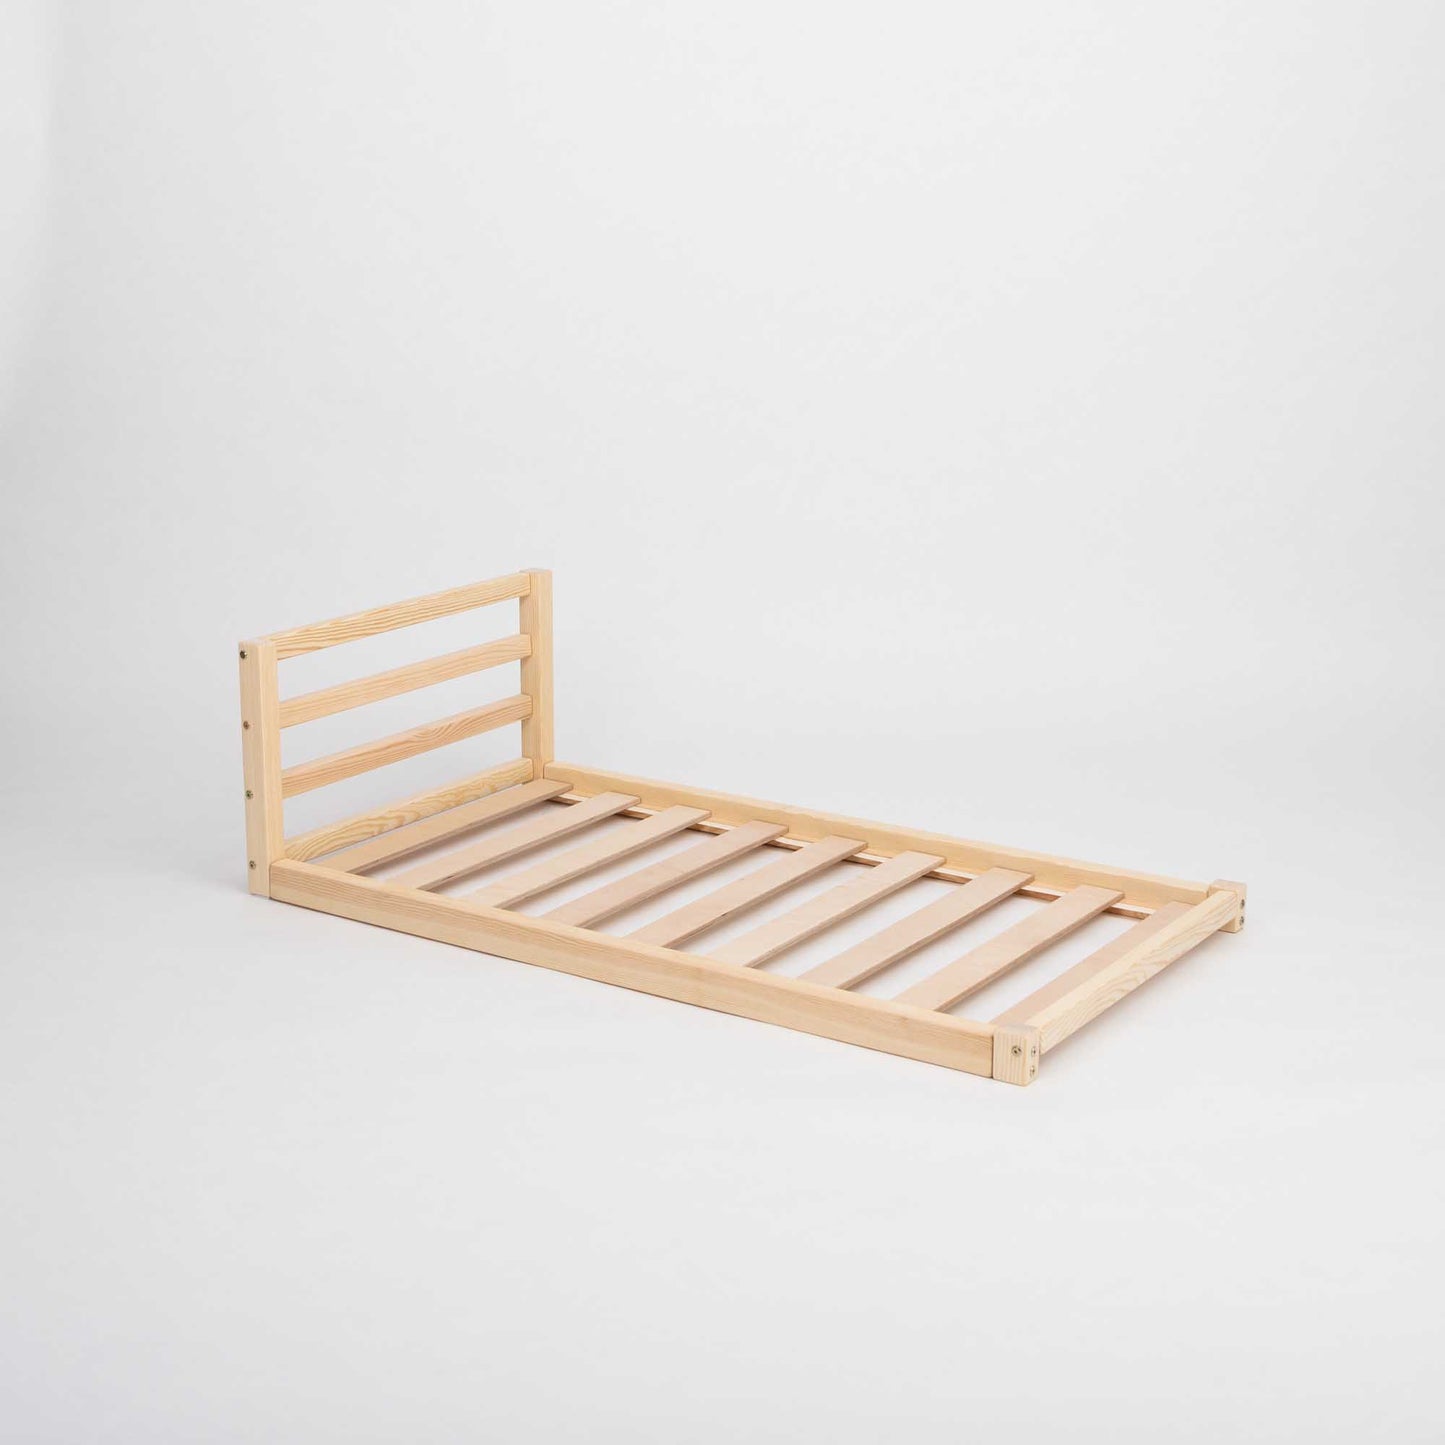 A 2-in-1 transformable kids' bed with a horizontal rail headboard from Sweet Home From Wood that can grow with the child, featuring slats on a white background.